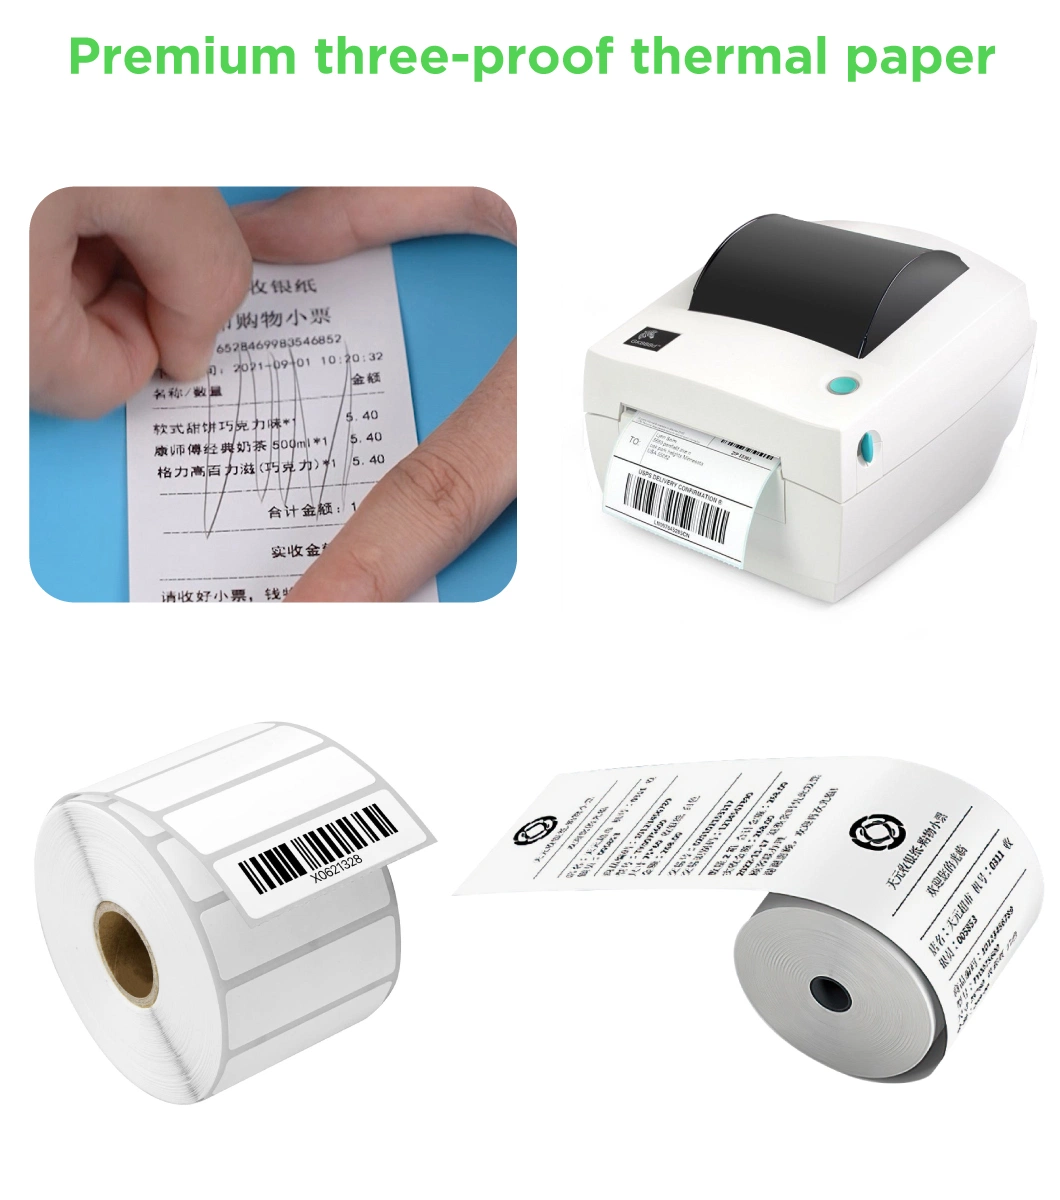 Directly Print Barcode Thermal Label Bar Coded Sticker Self Adhesive Thermal Paper Jumbo Rolls with Hot Melt Glue